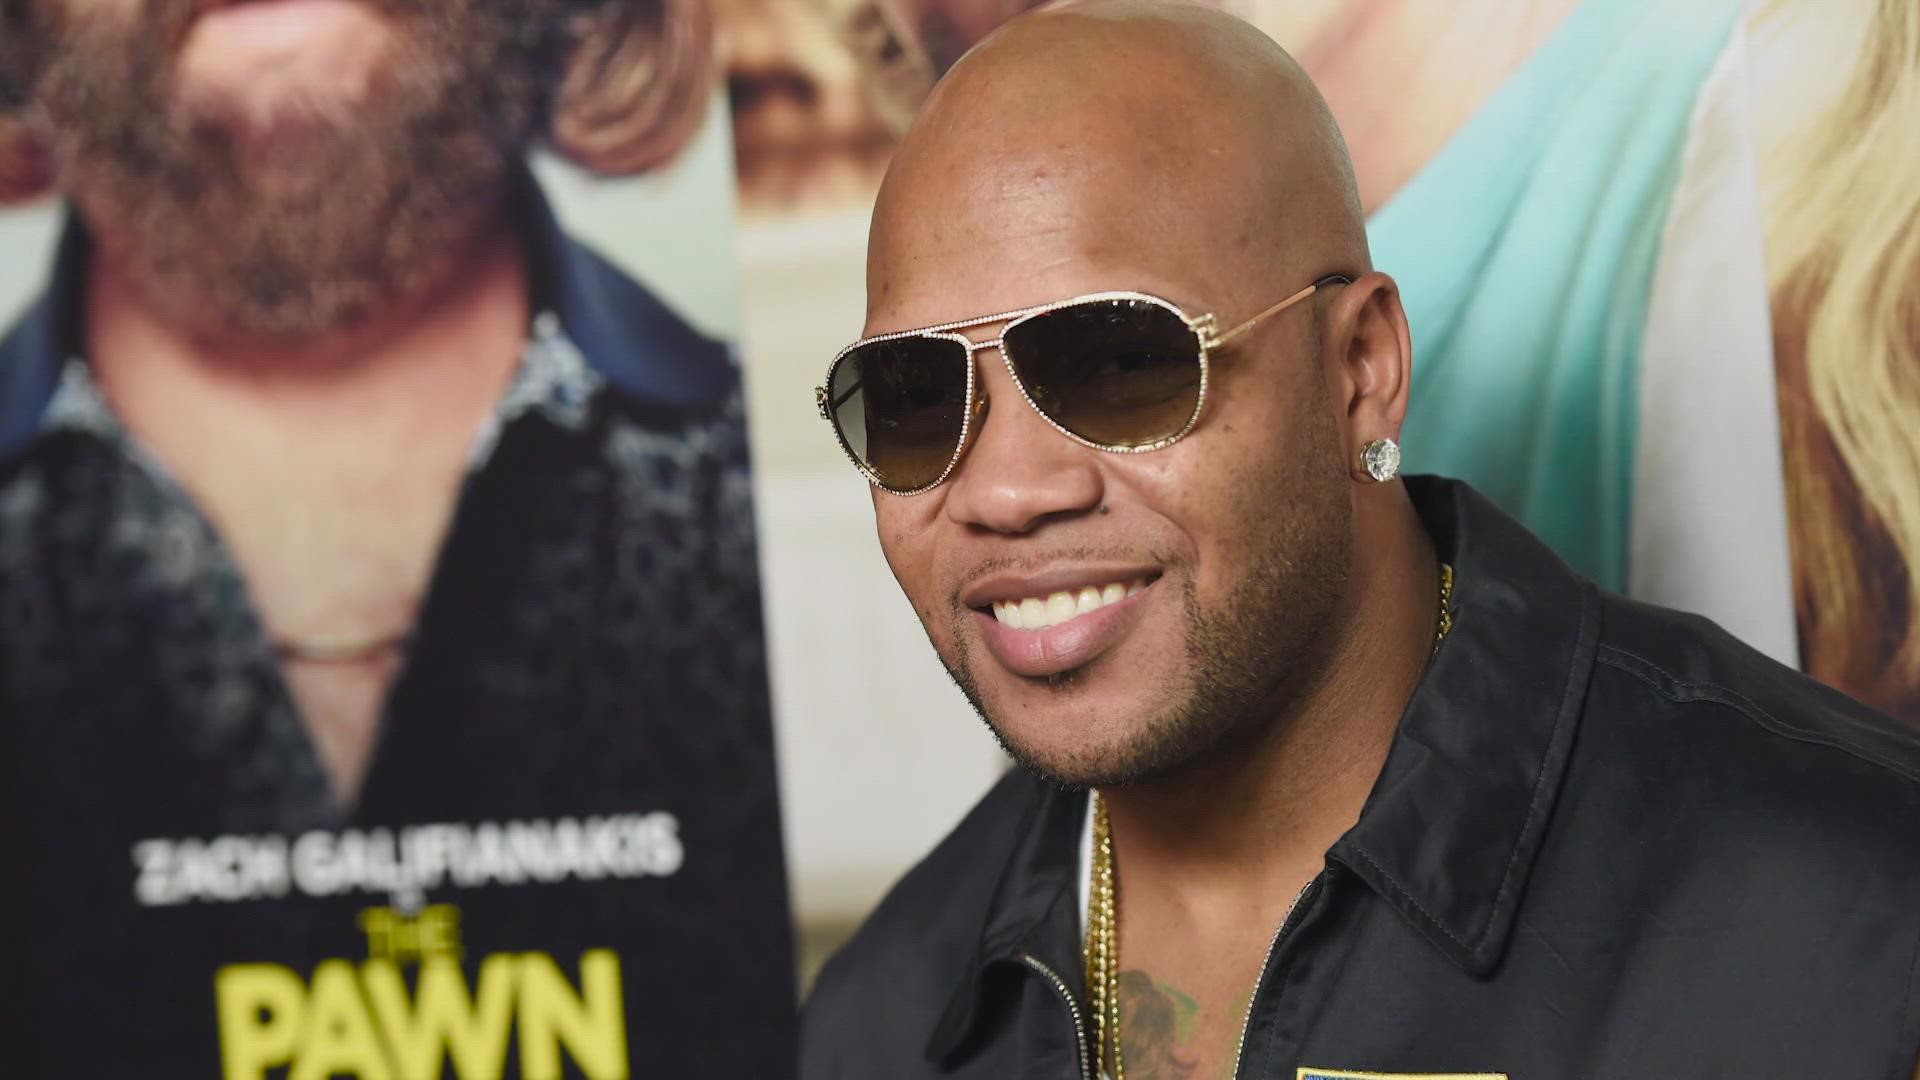 Flo Rida and his production company had sued Florida-based Celsius Holdings Inc., claiming that the company had violated the conditions of an endorsement deal.